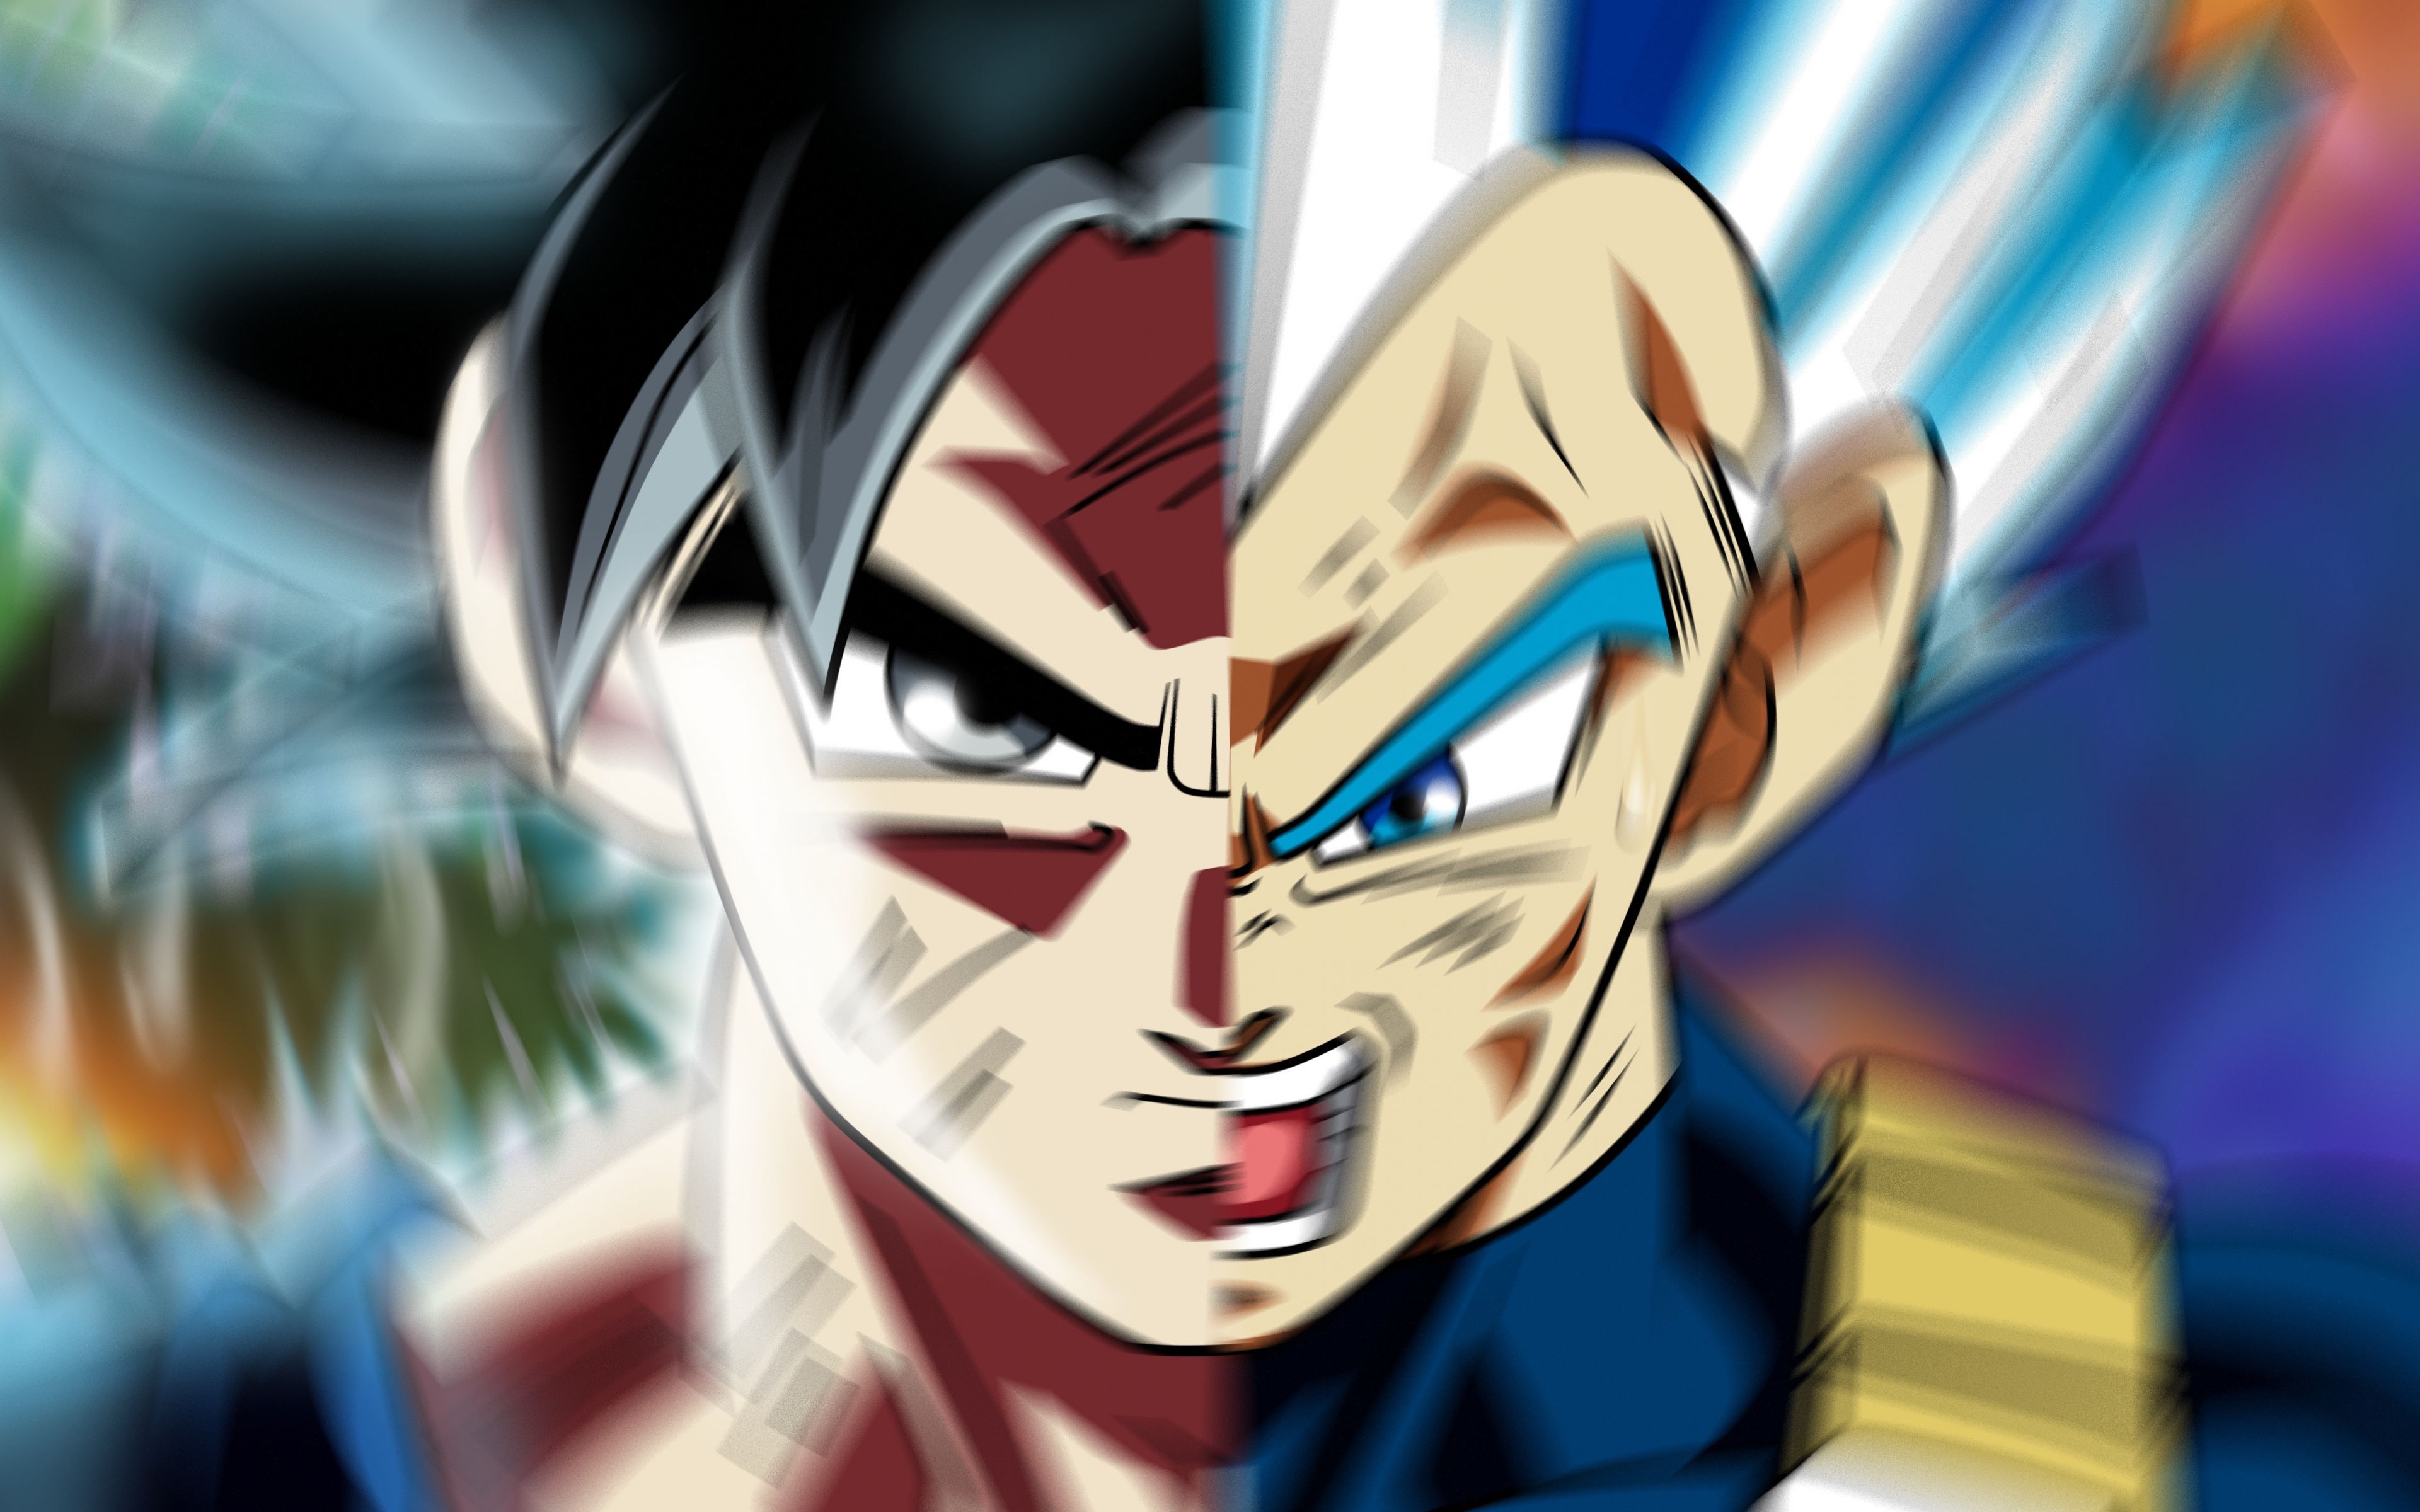 Download 3840x2400 wallpapers face off, goku and vegeta, dragon ball super, 4k, ultra hd 16:10, widescreen, 3840x2400 hd image, background, 3069